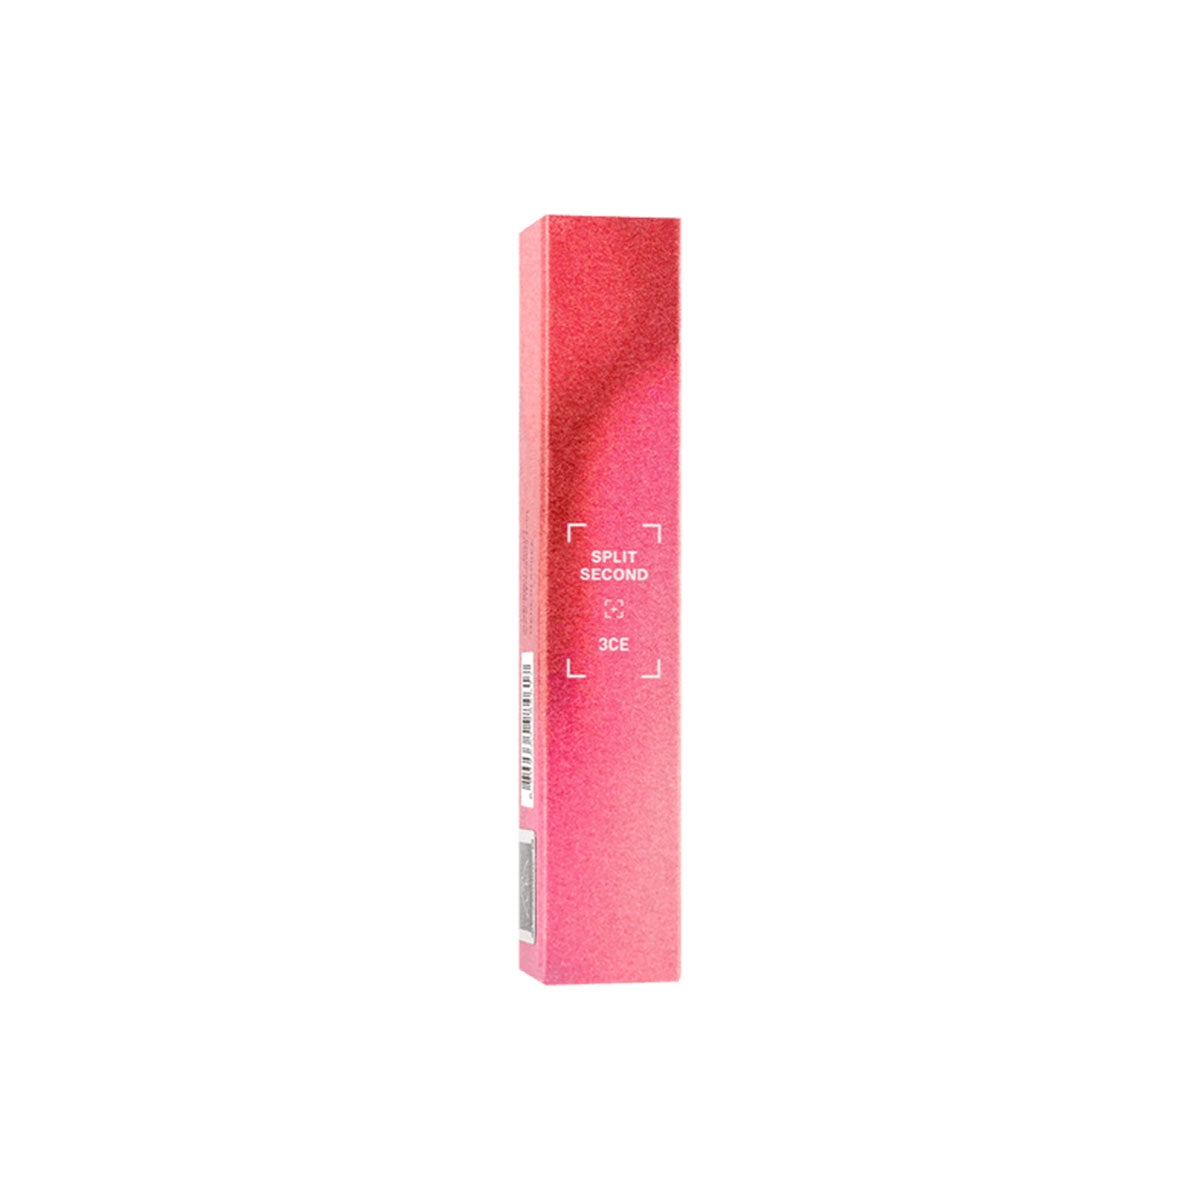 3CE Blur Water Tint Split Second Edition #Early Hour 4.6g